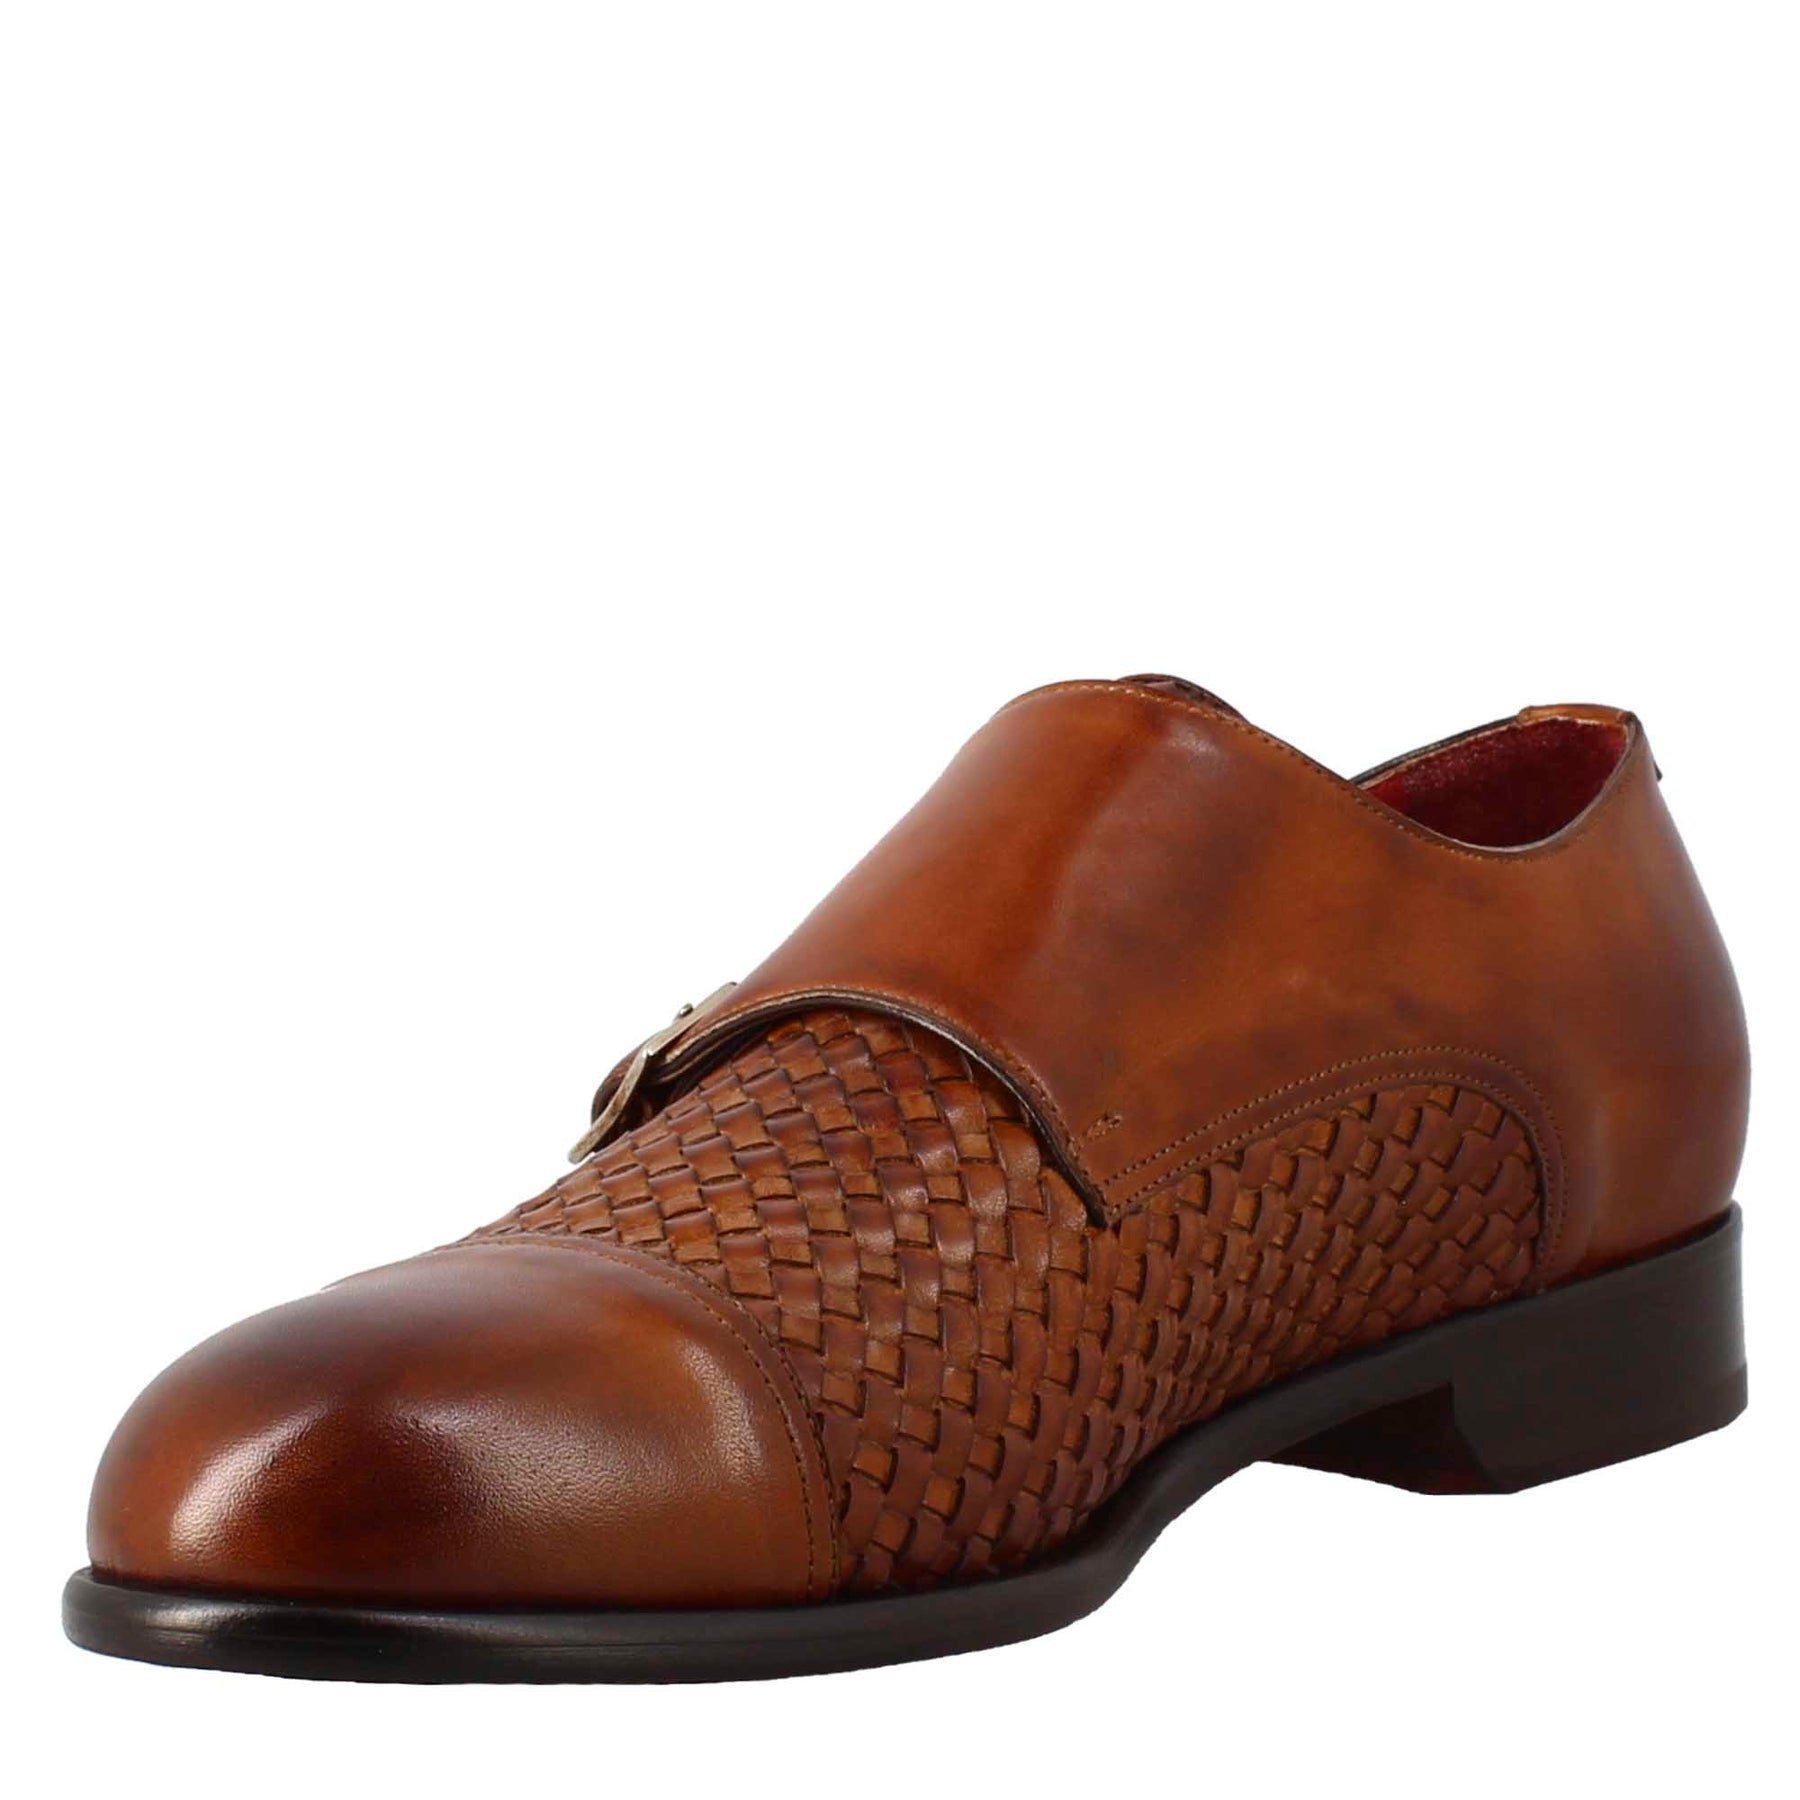 Men's double buckle shoe in sienna brown woven leather